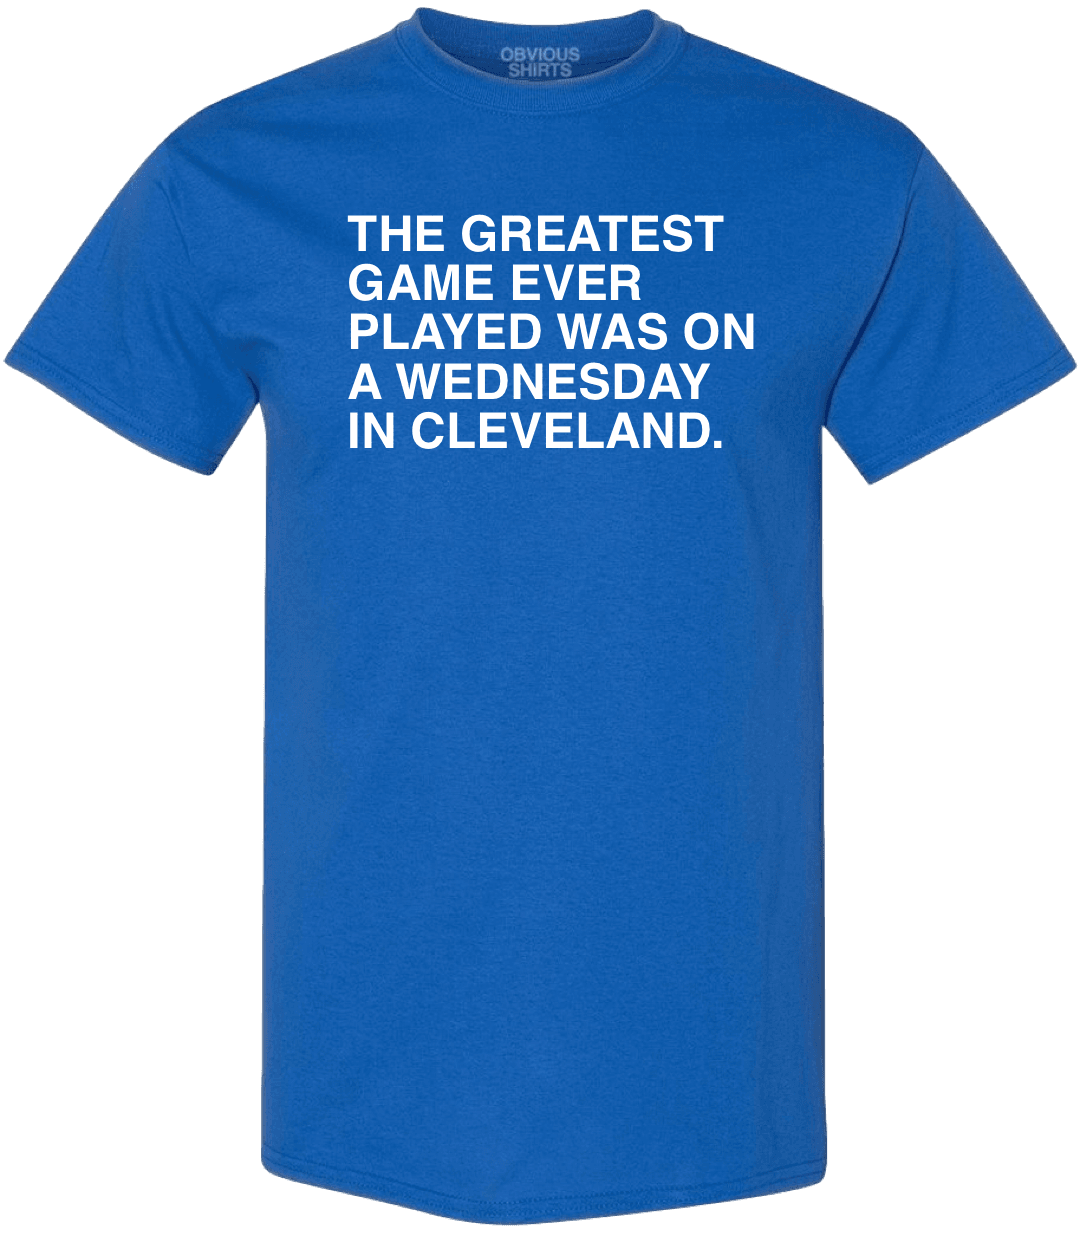 THE GREATEST GAME EVER PLAYED. (BIG & TALL) - OBVIOUS SHIRTS.